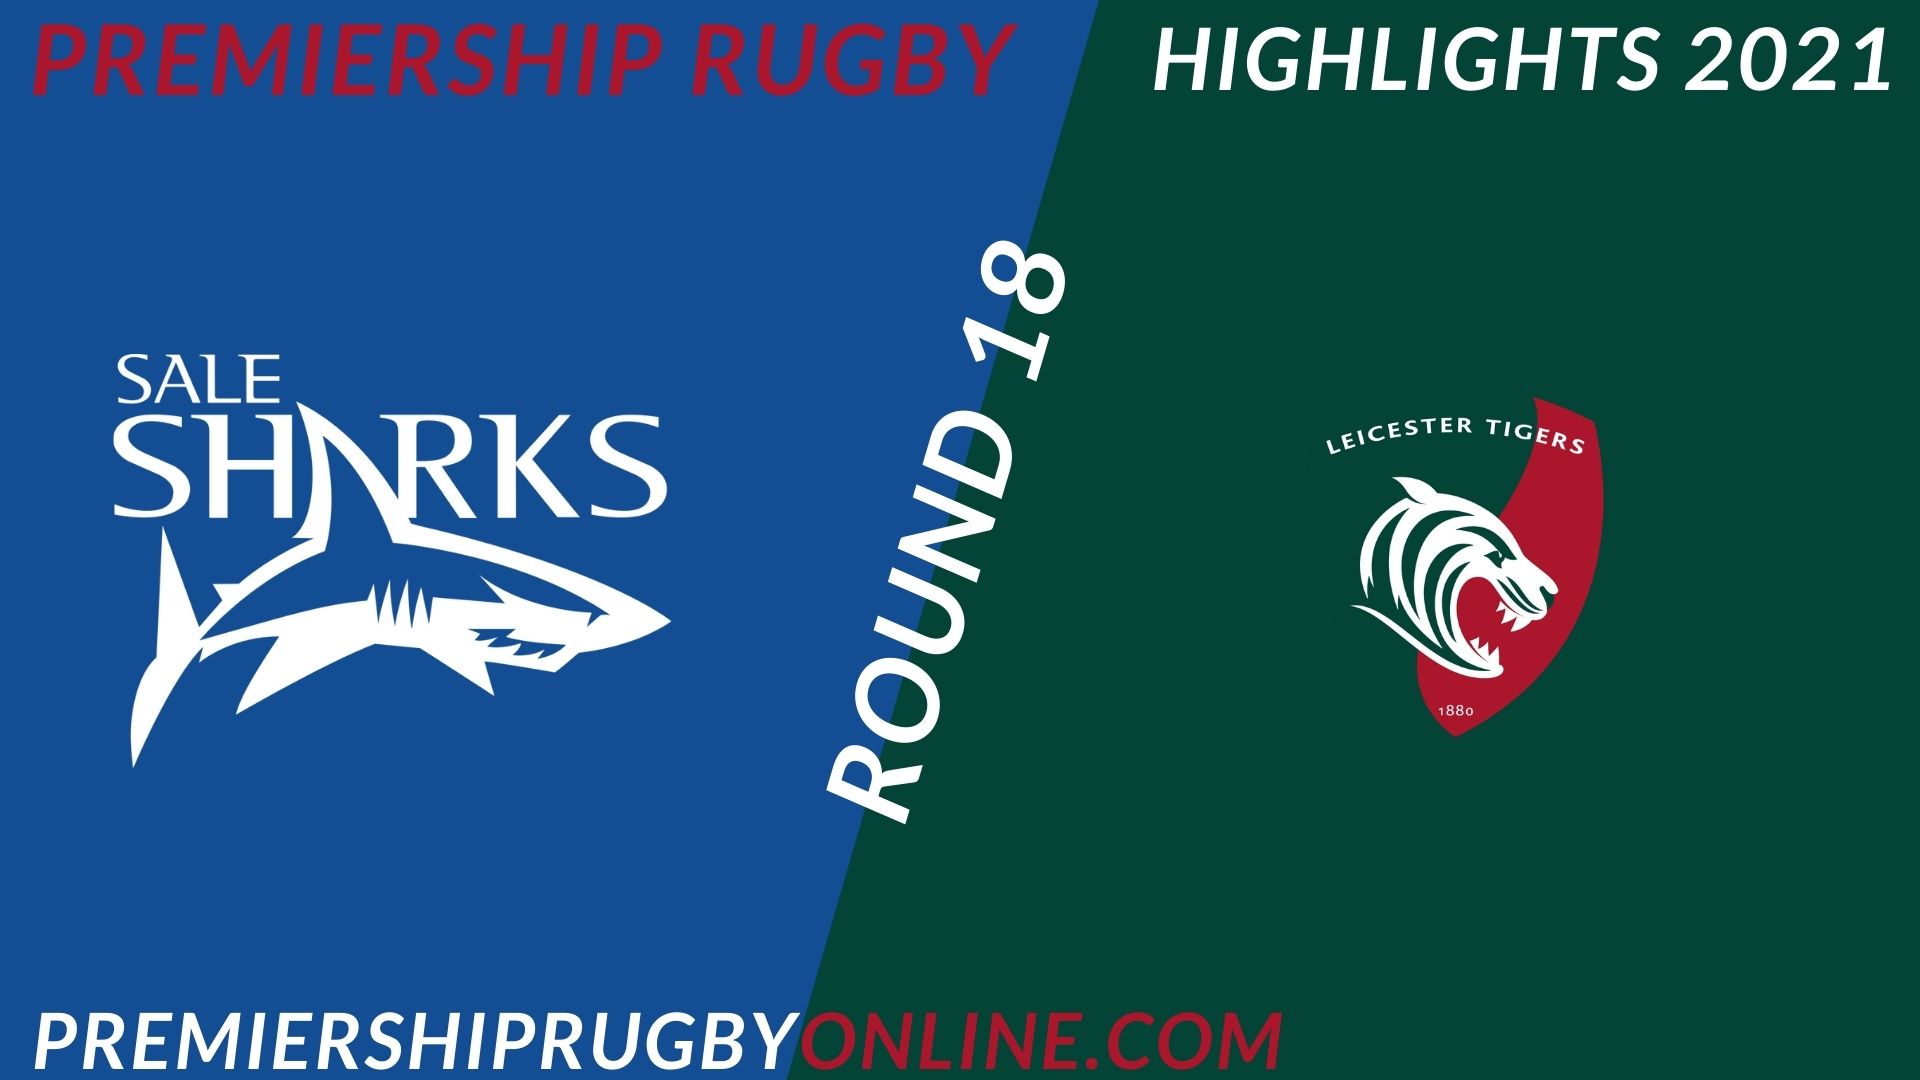 Sale Sharks Vs Leicester Tigers Highlights 2021 RD 18